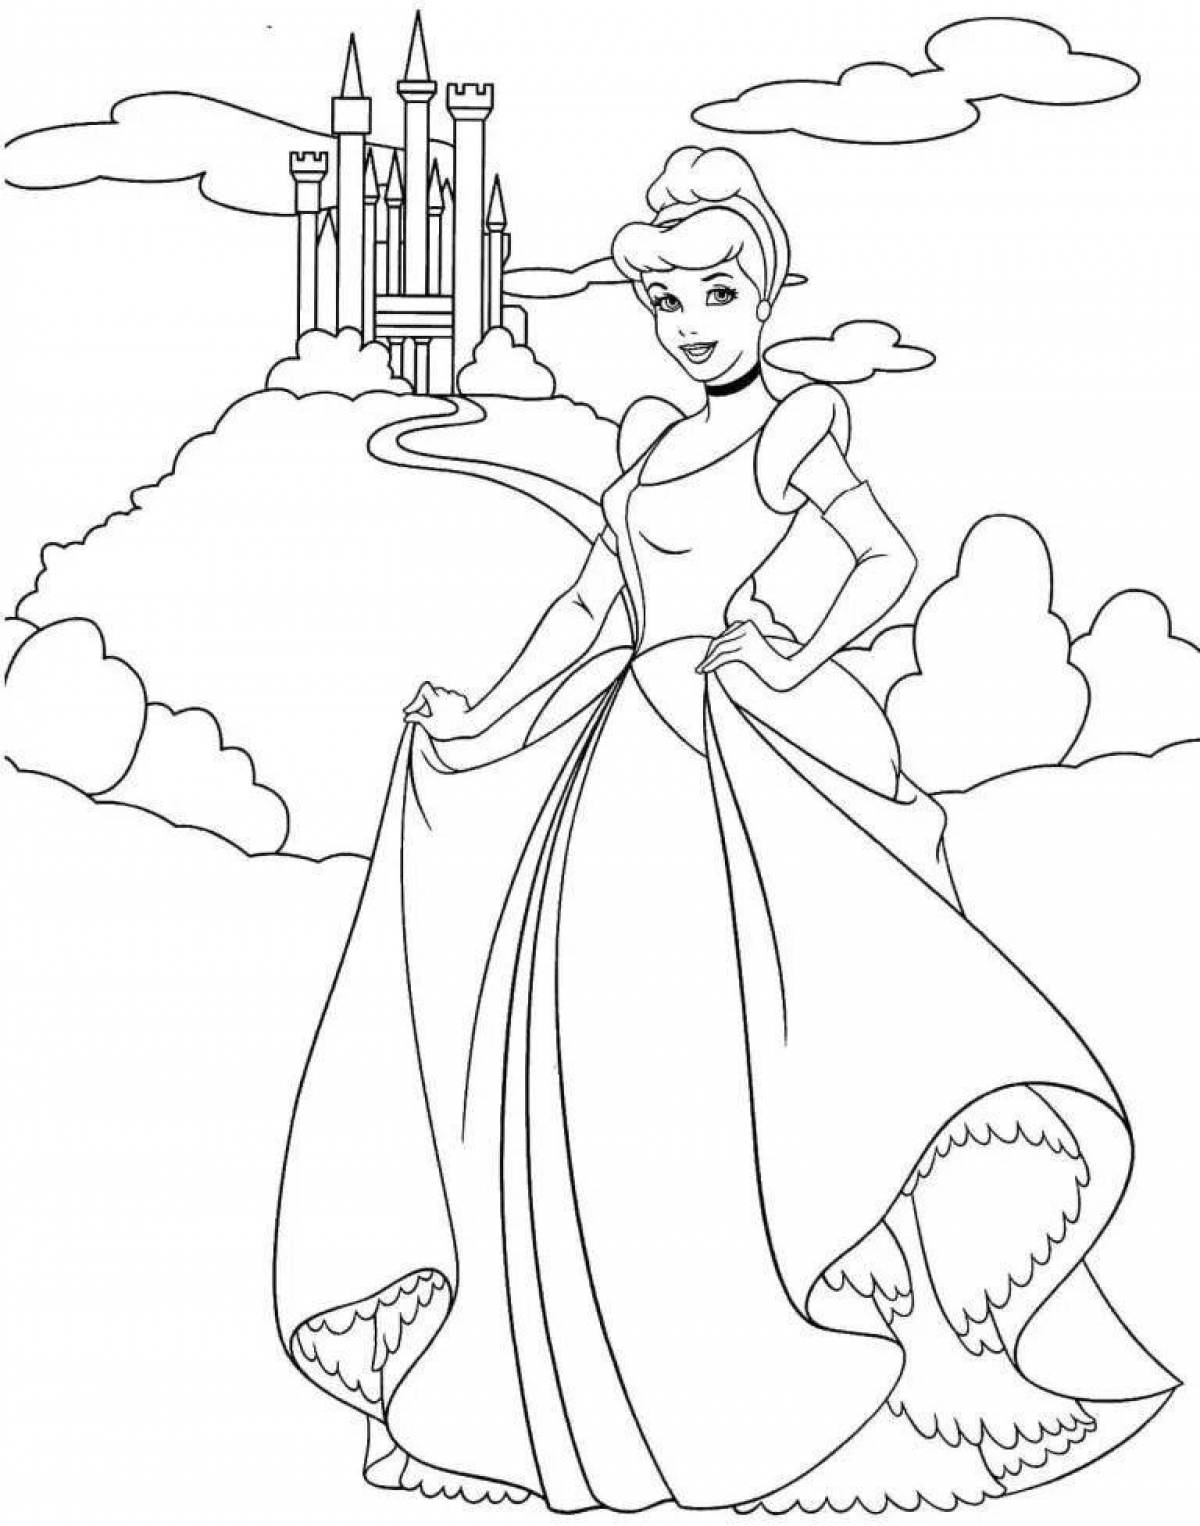 Magic coloring Cinderella for children 5-6 years old